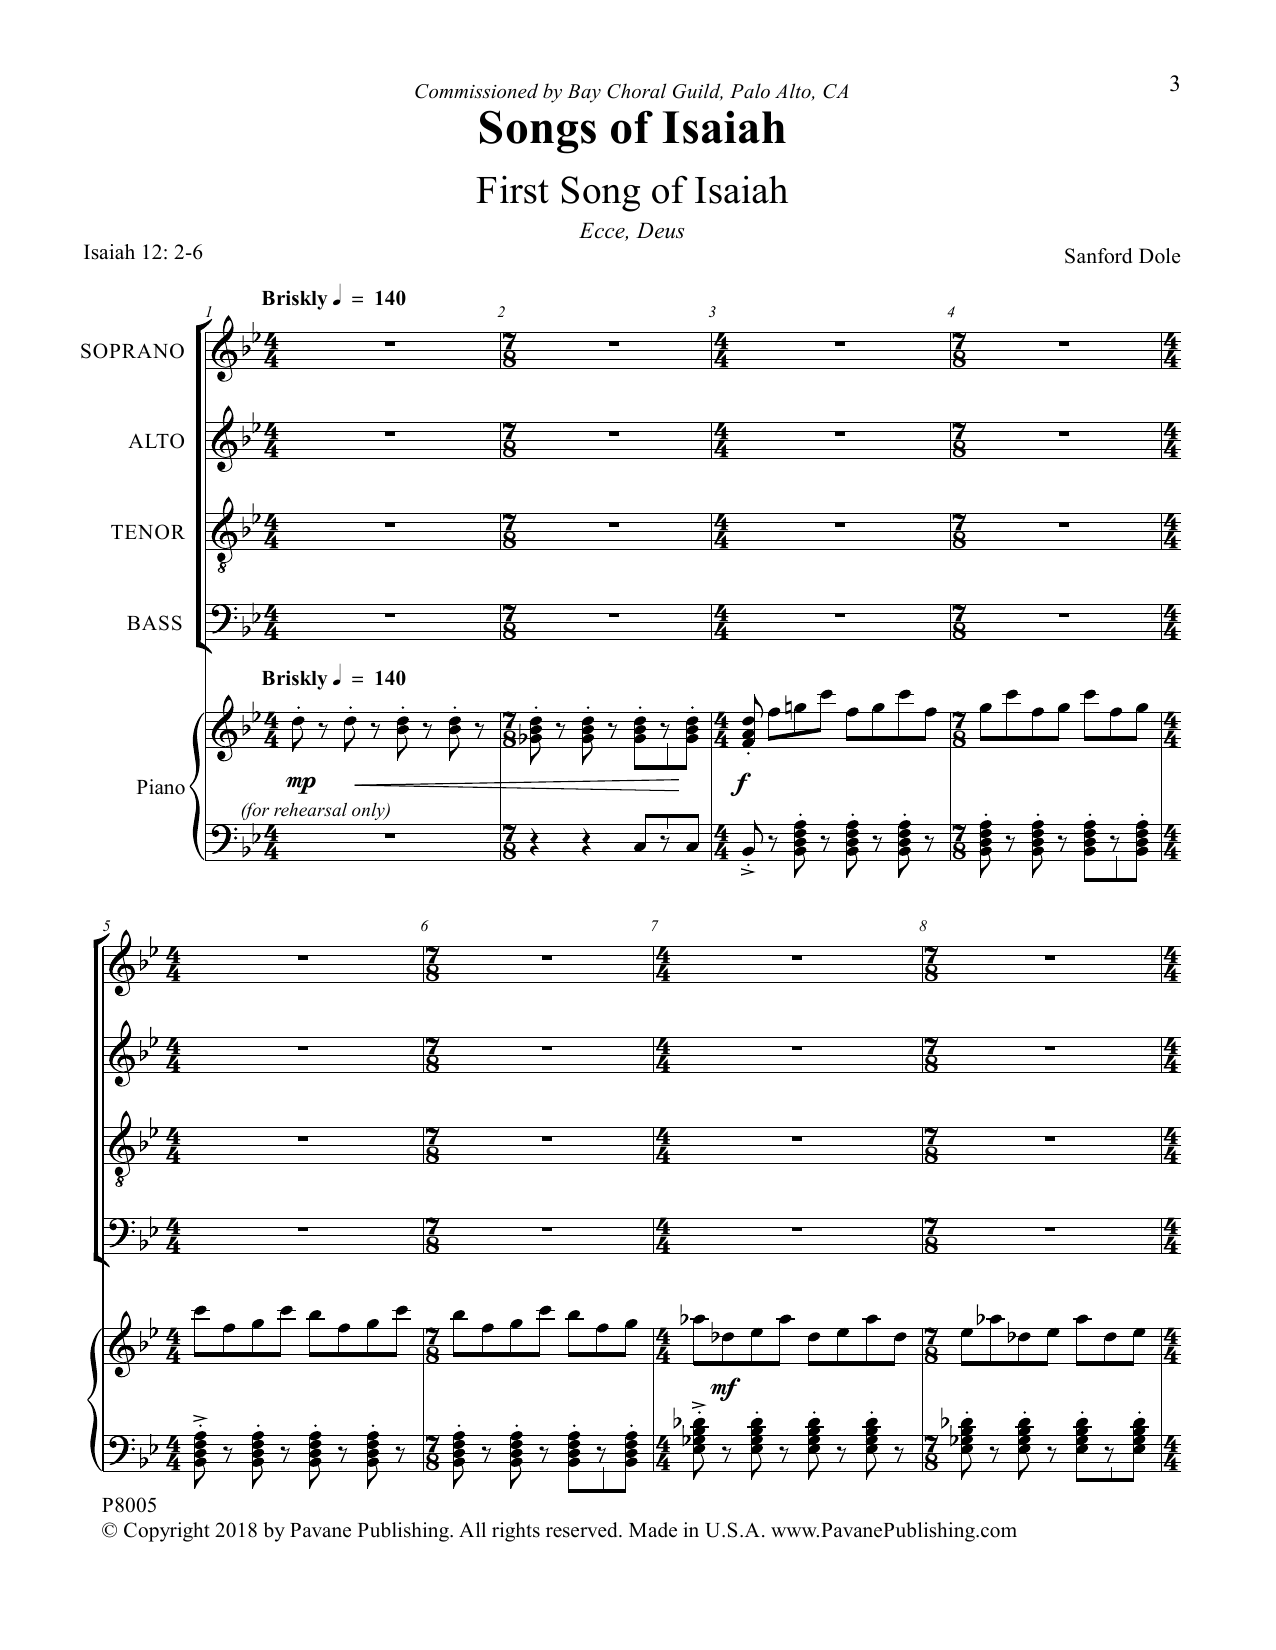 Download Sanford Dole Songs of Isaiah Sheet Music